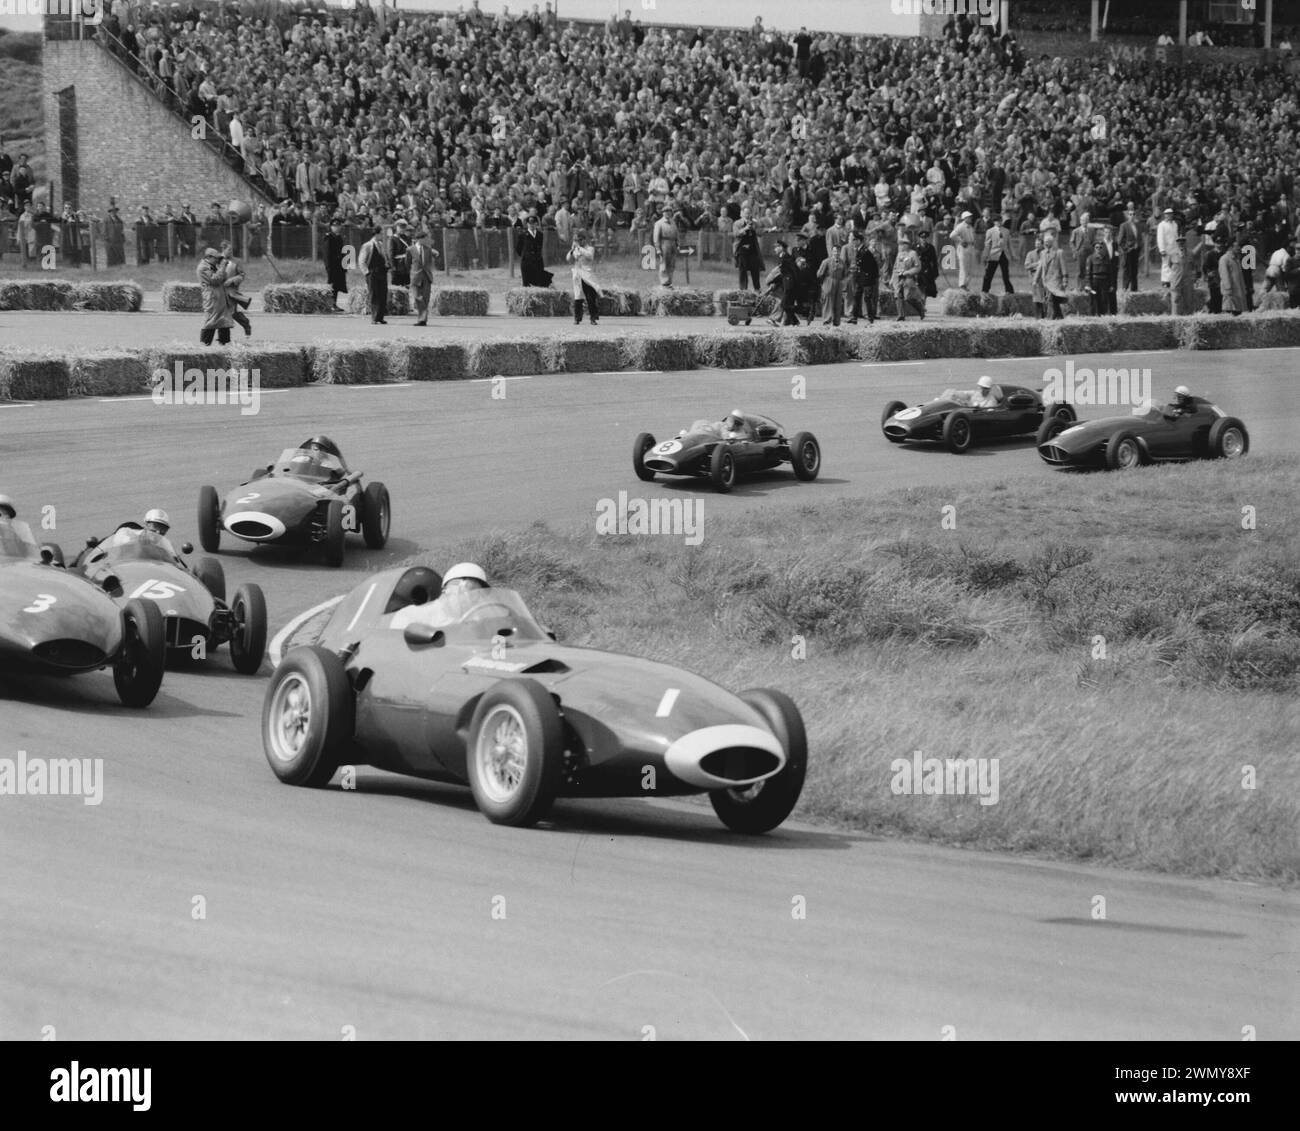 Zandvoort, Netherlands.  May 26, 1958. 1958 Grand Prix of the Netherlands, In front Stirling Moss (1) followed by Stuart Lewis-Evans (3), Harry Schell (15), Tony Brooks (2), Jack Brabham (8) and Roy Salvadori (7) in the Dutch Formula 1 Grand Prix Stock Photo